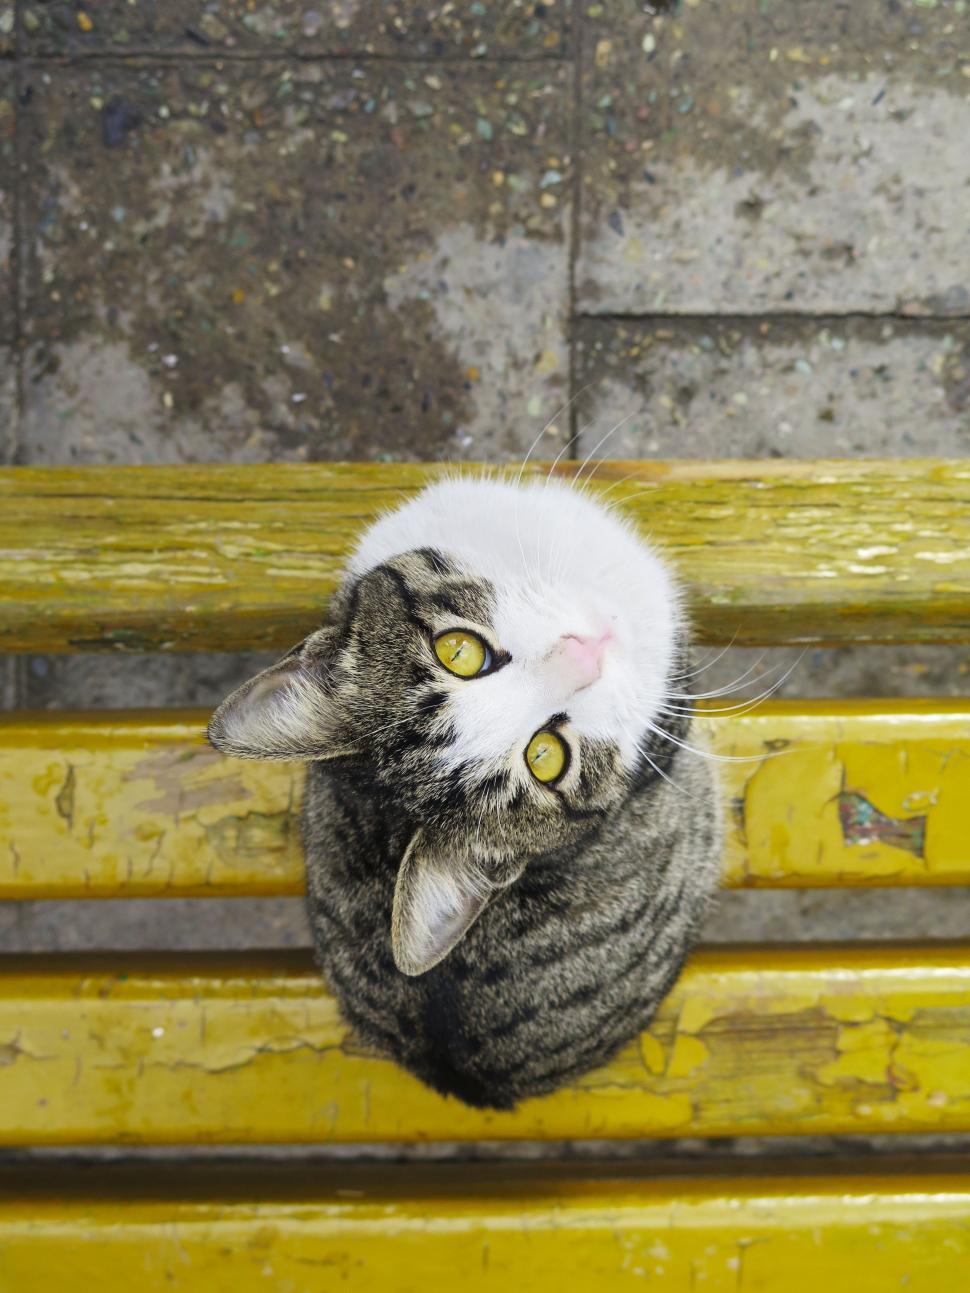 Free Image of Gray and White Cat Sitting on Yellow Bench 